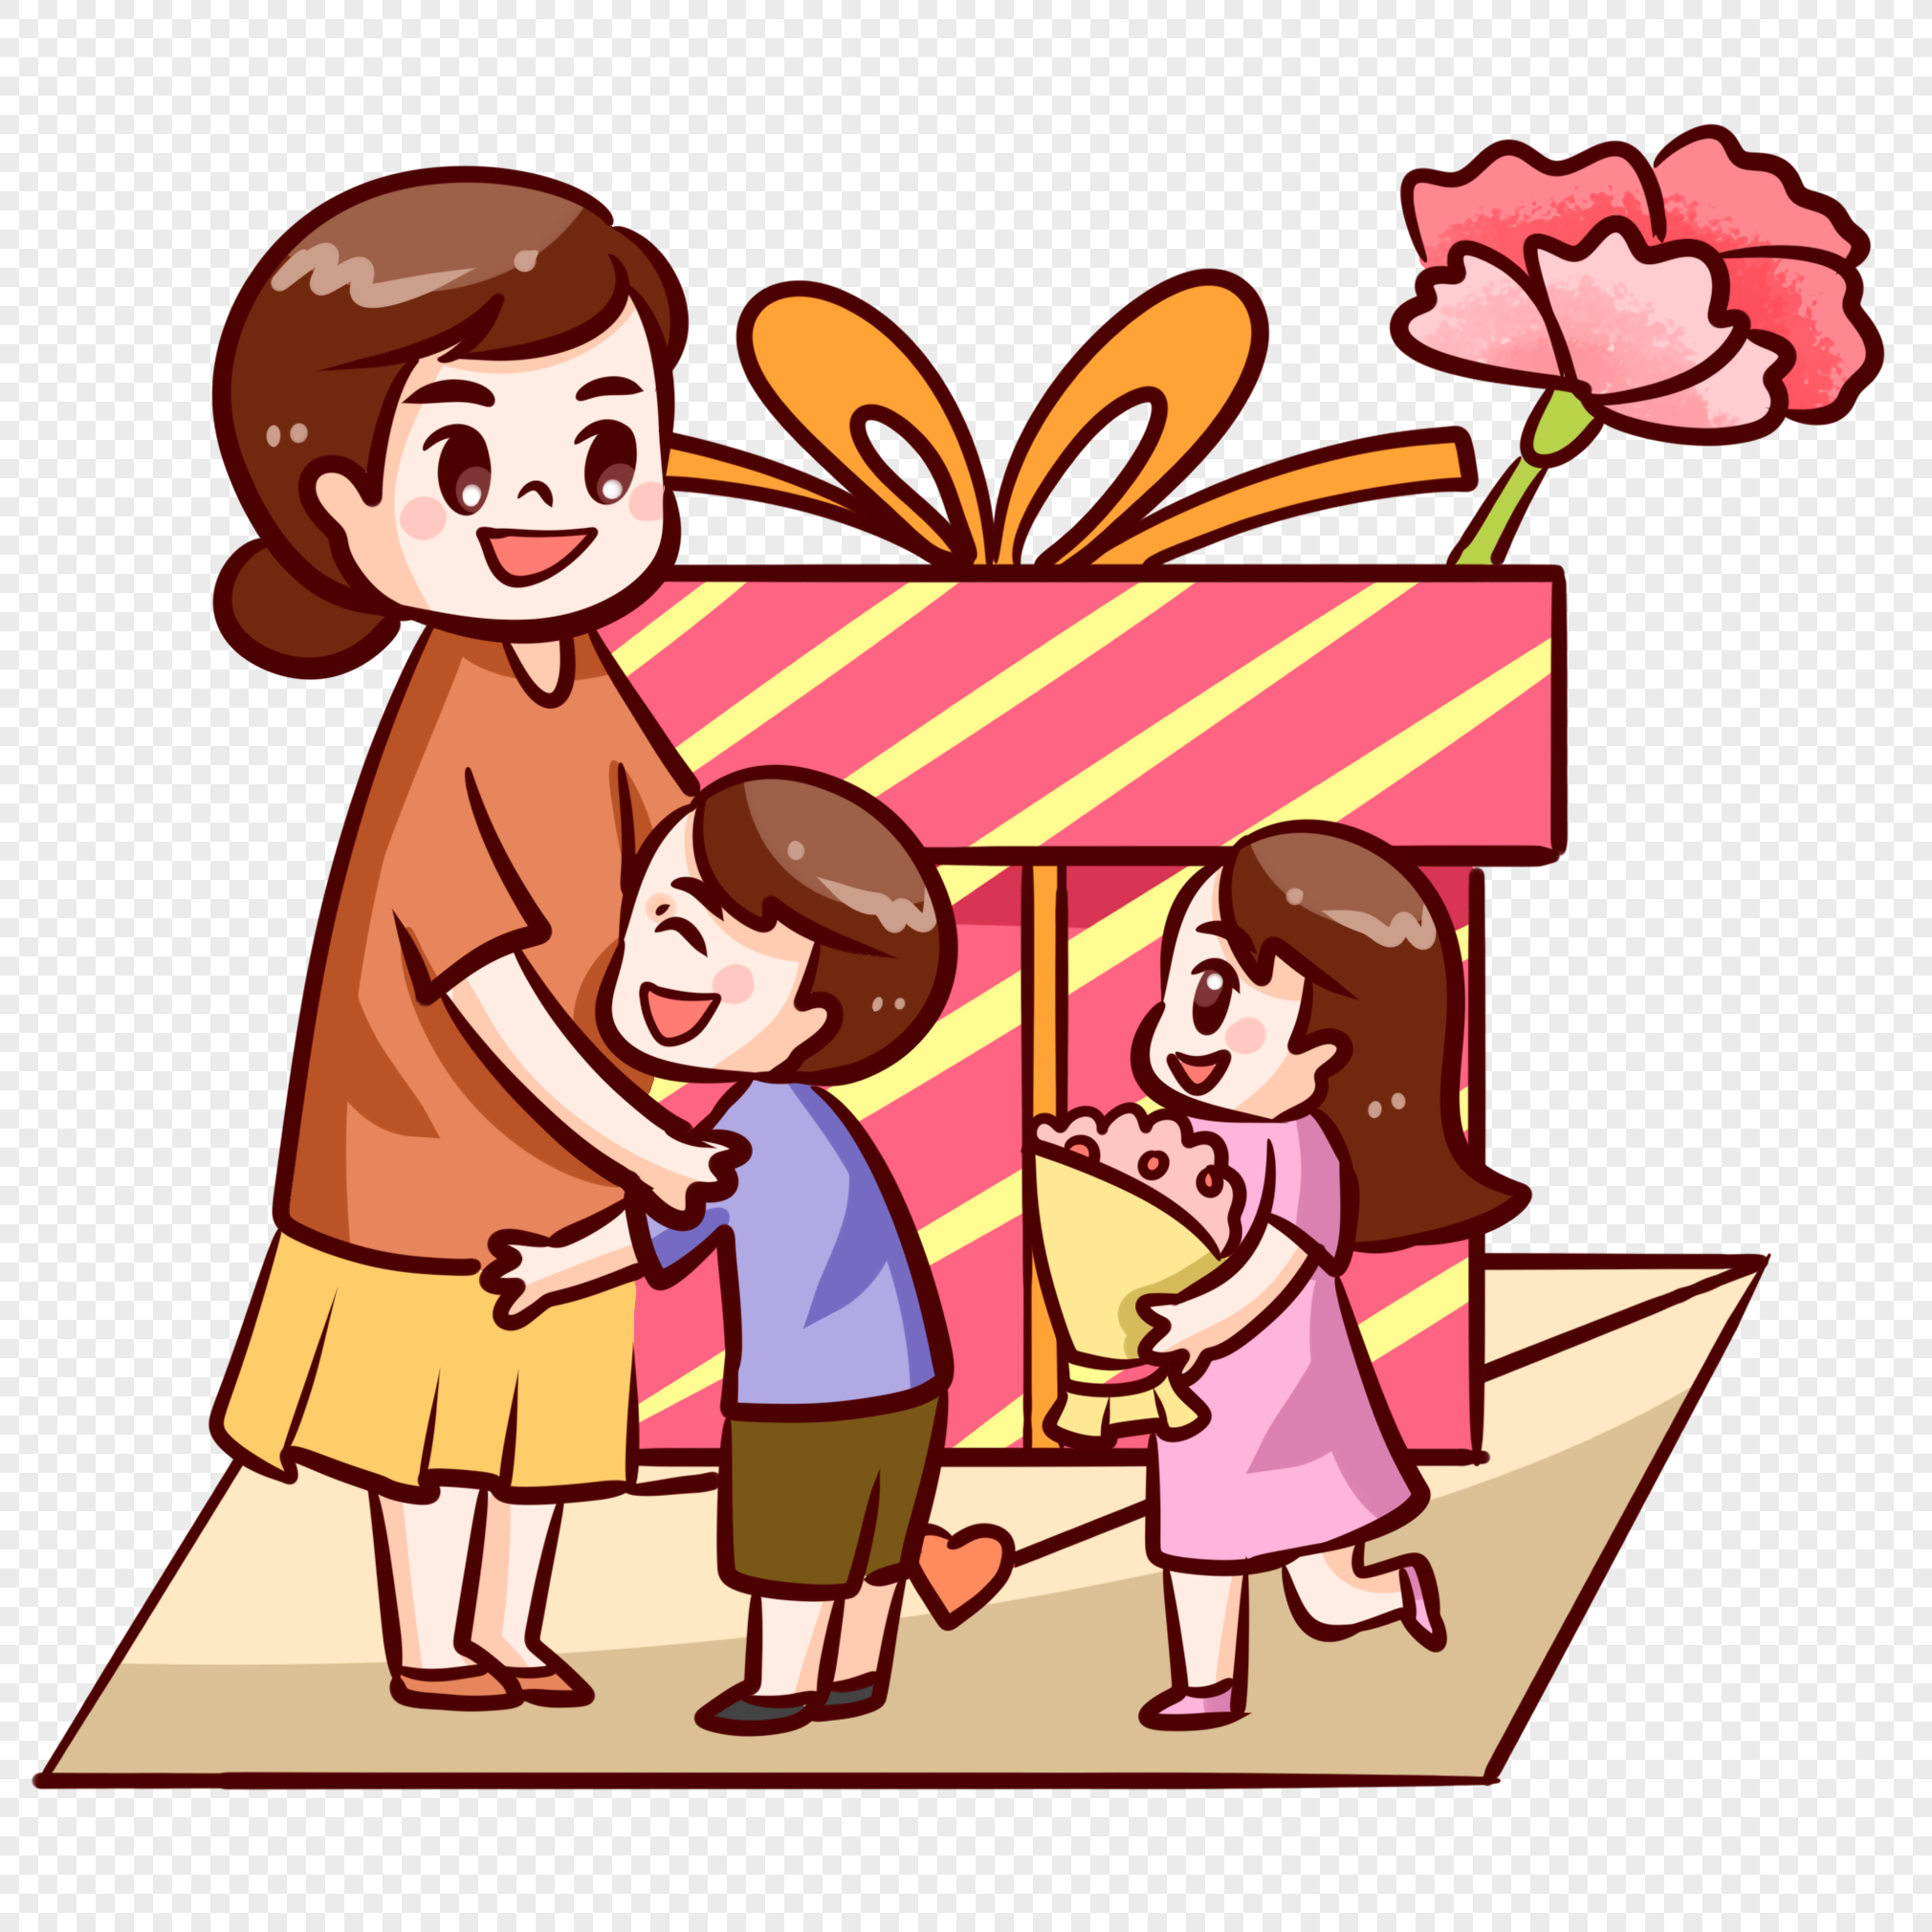 Asian Kid Give Gift Mom: Over 15 Royalty-Free Licensable Stock Vectors &  Vector Art